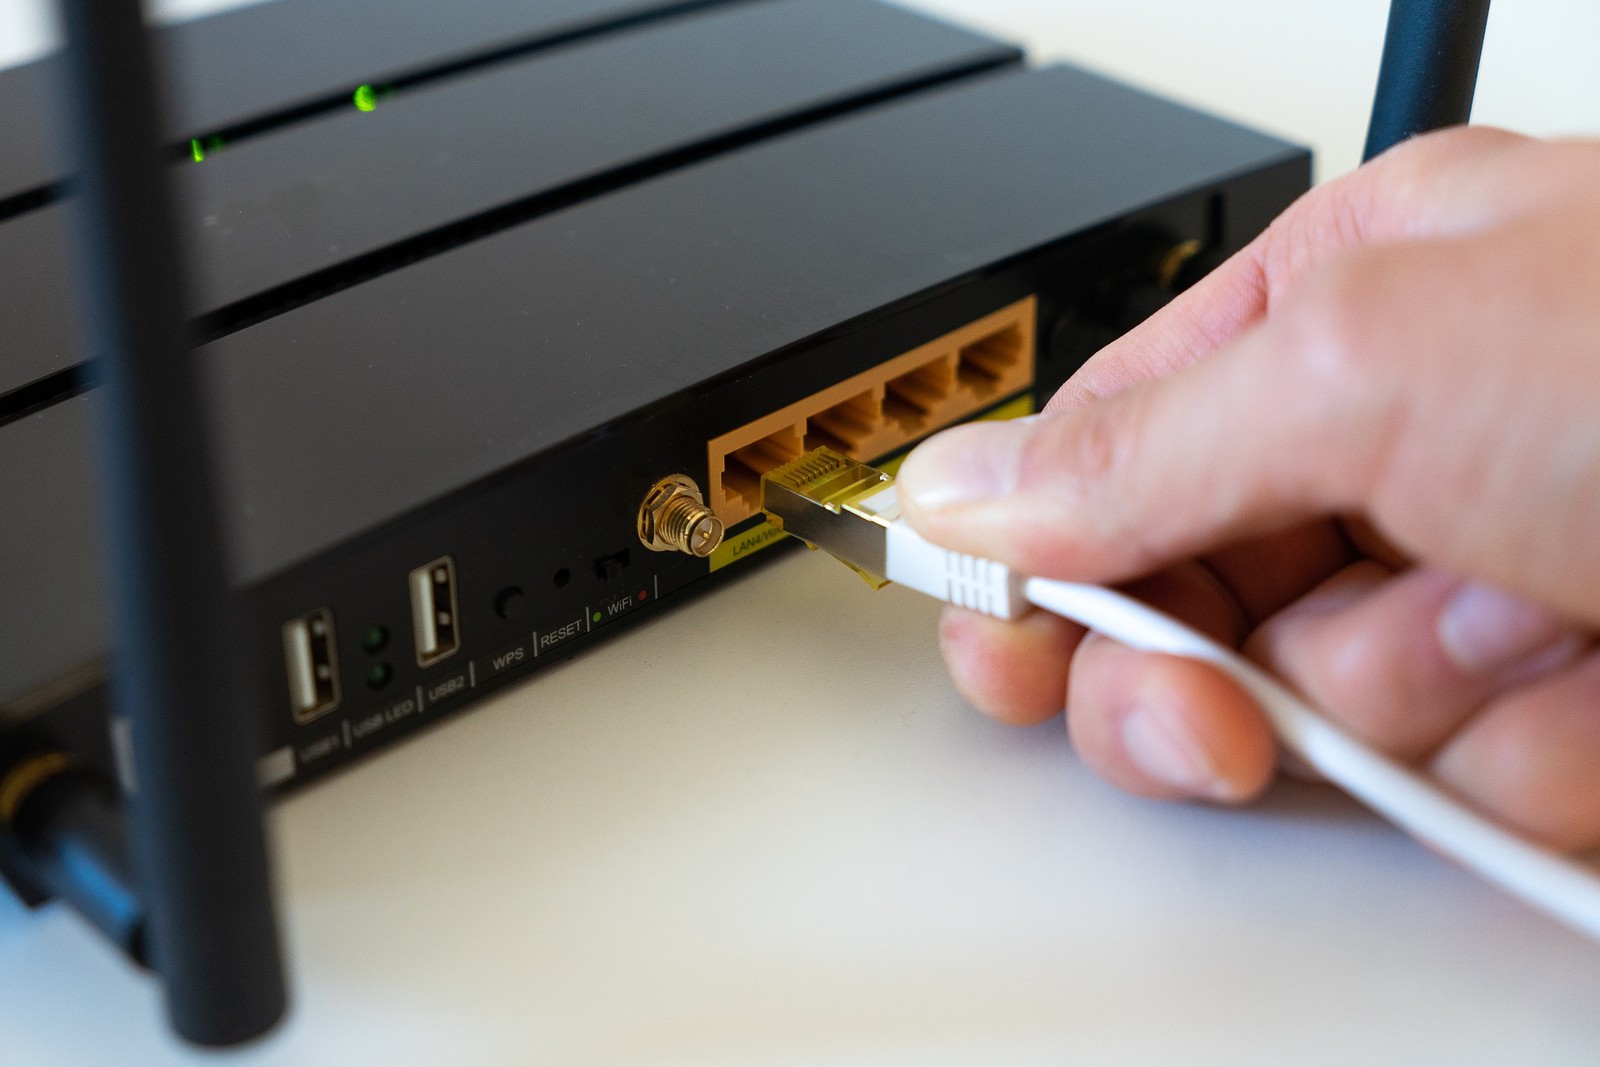 How to protect the router from tp-link hack